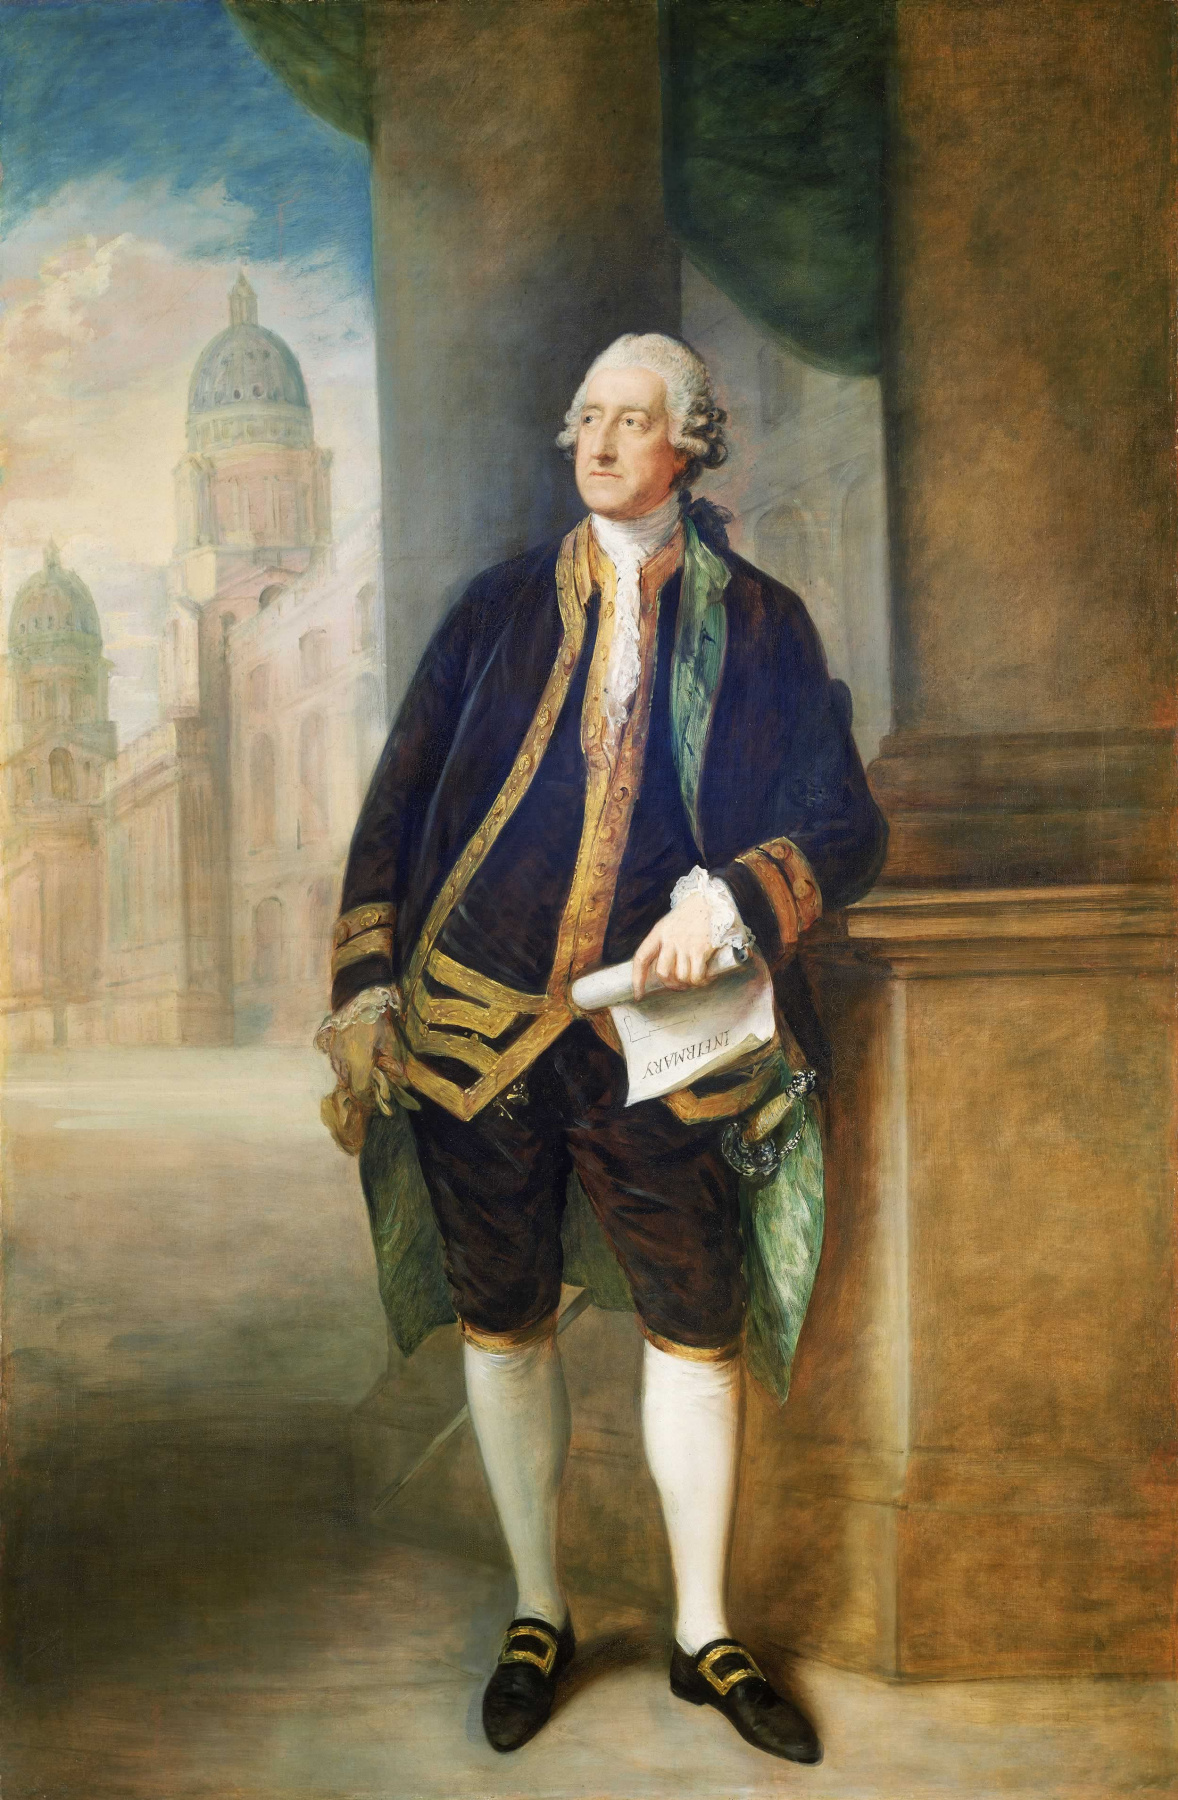 Thomas Gainsborough. John Montagu, 4th Earl of Sandwich, 1st Lord of the Admiralty